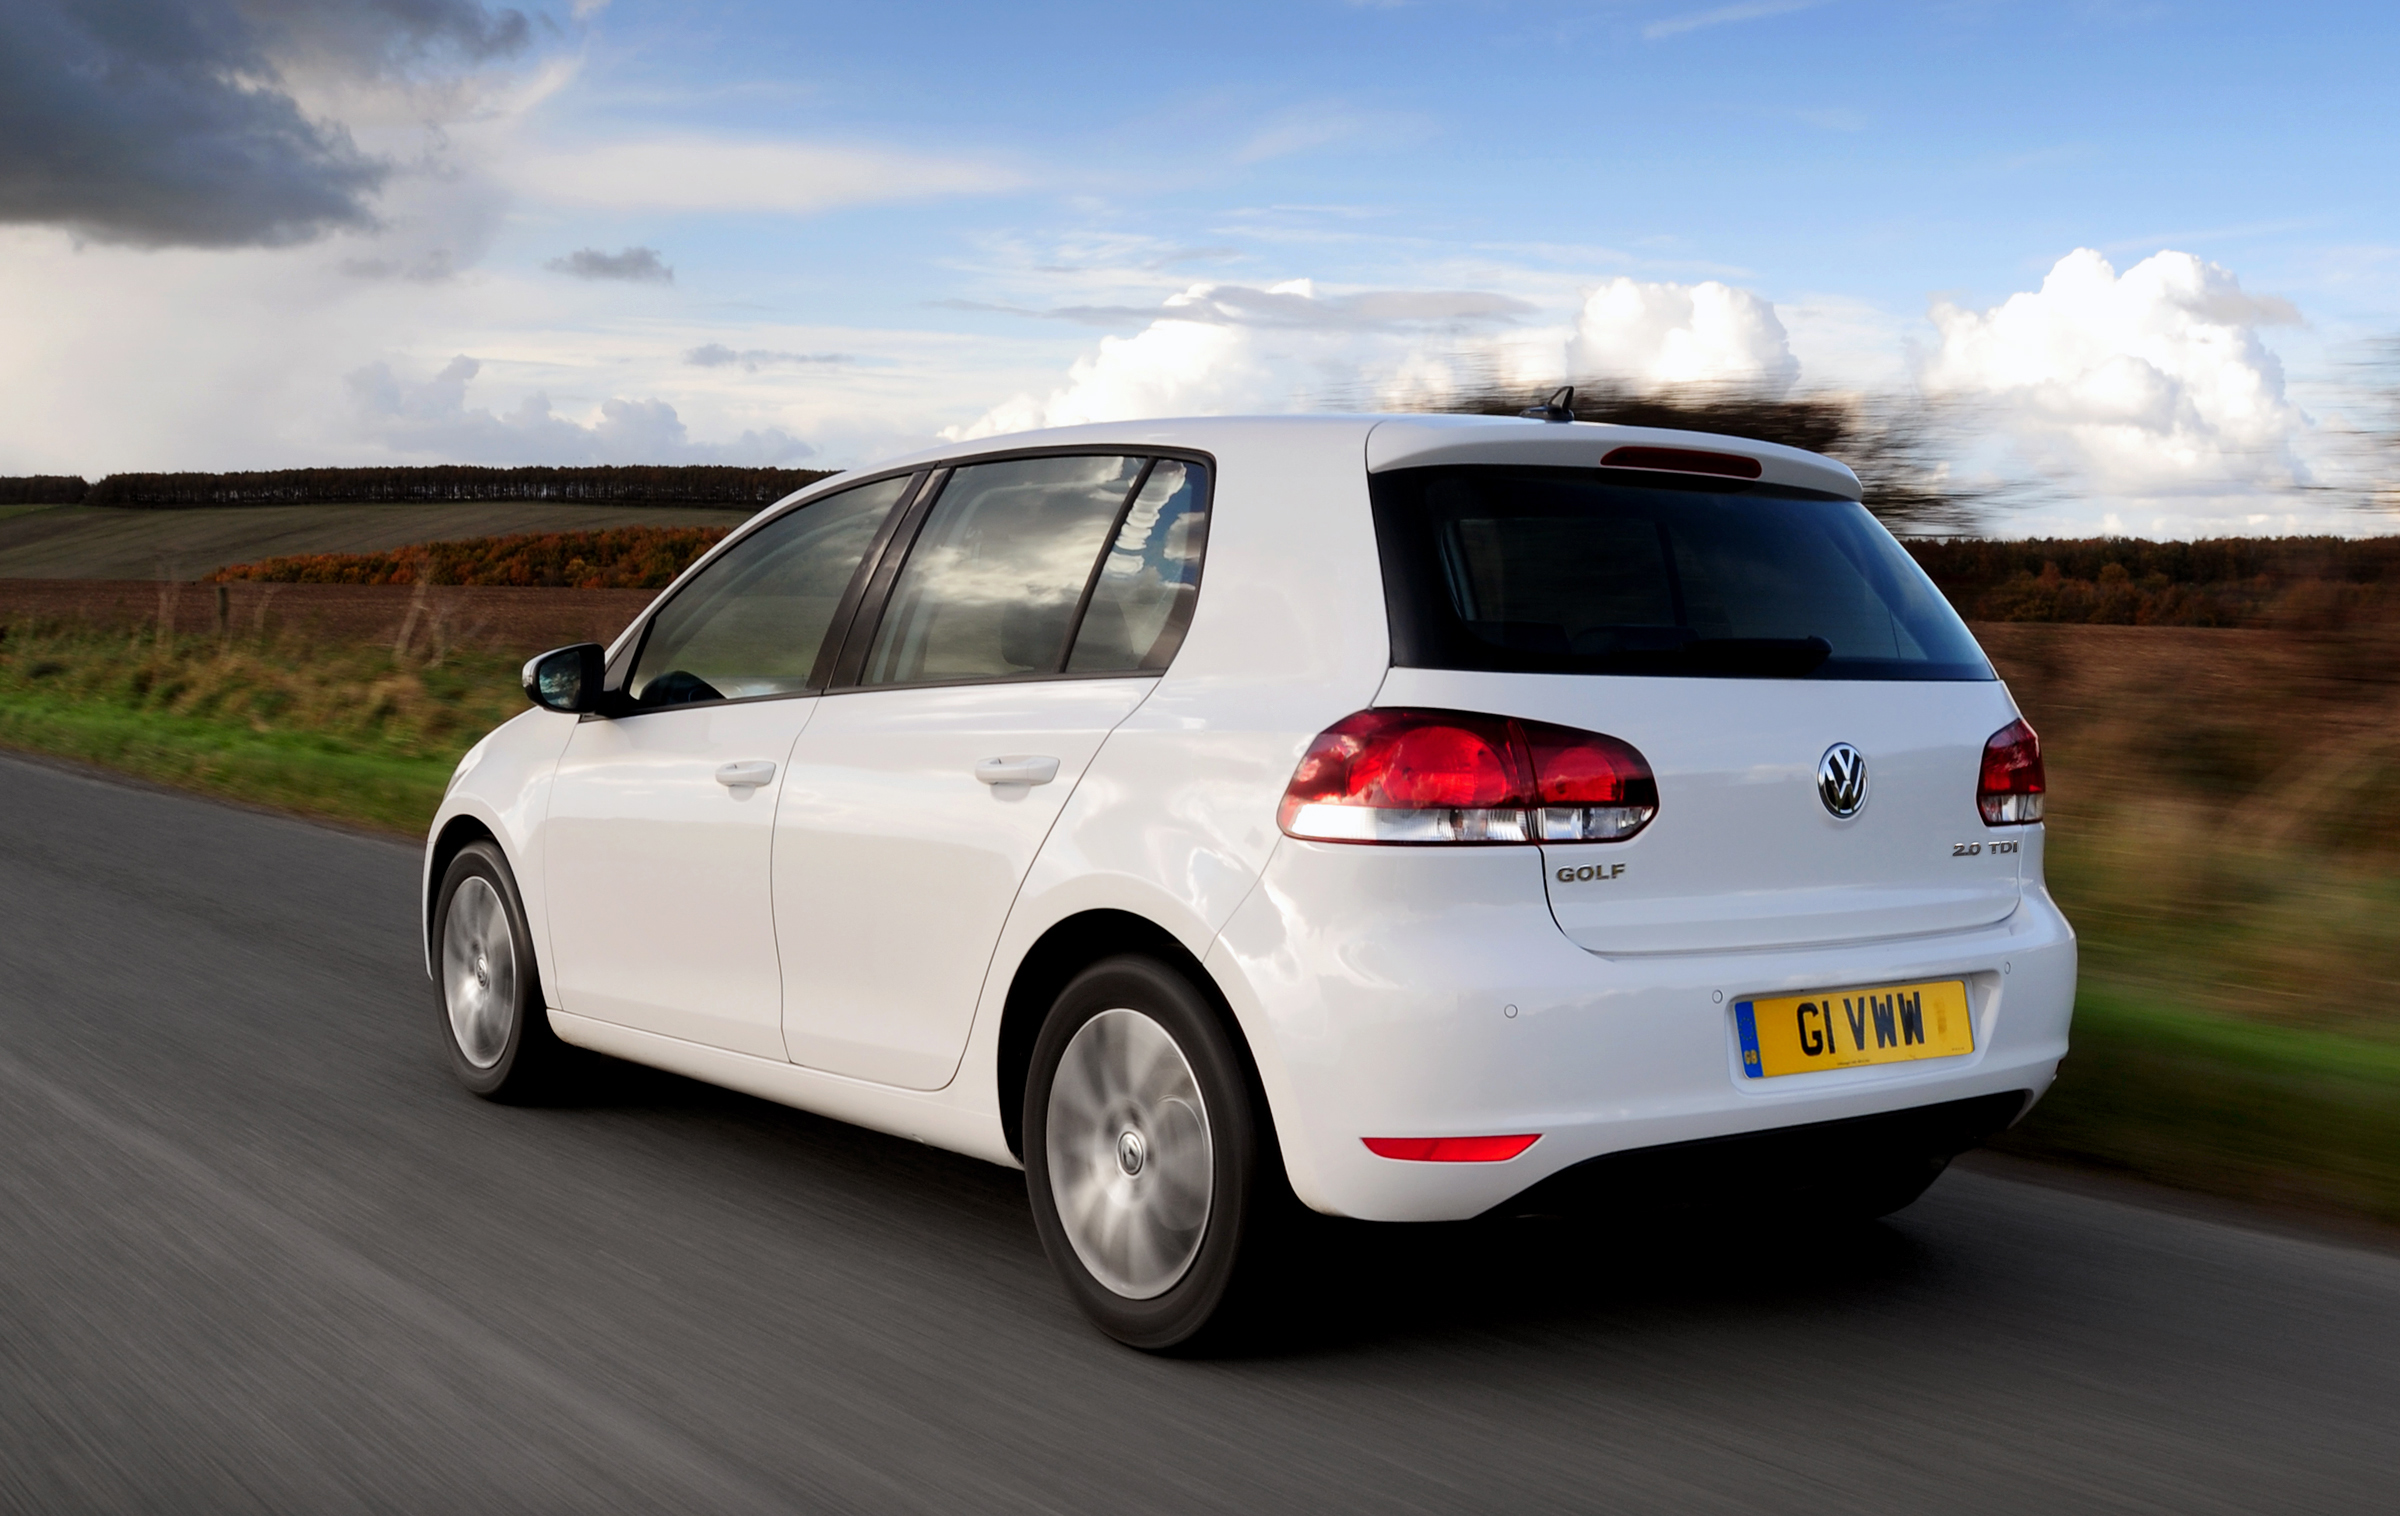 Volkswagen Golf VI Match is added to the model lineup